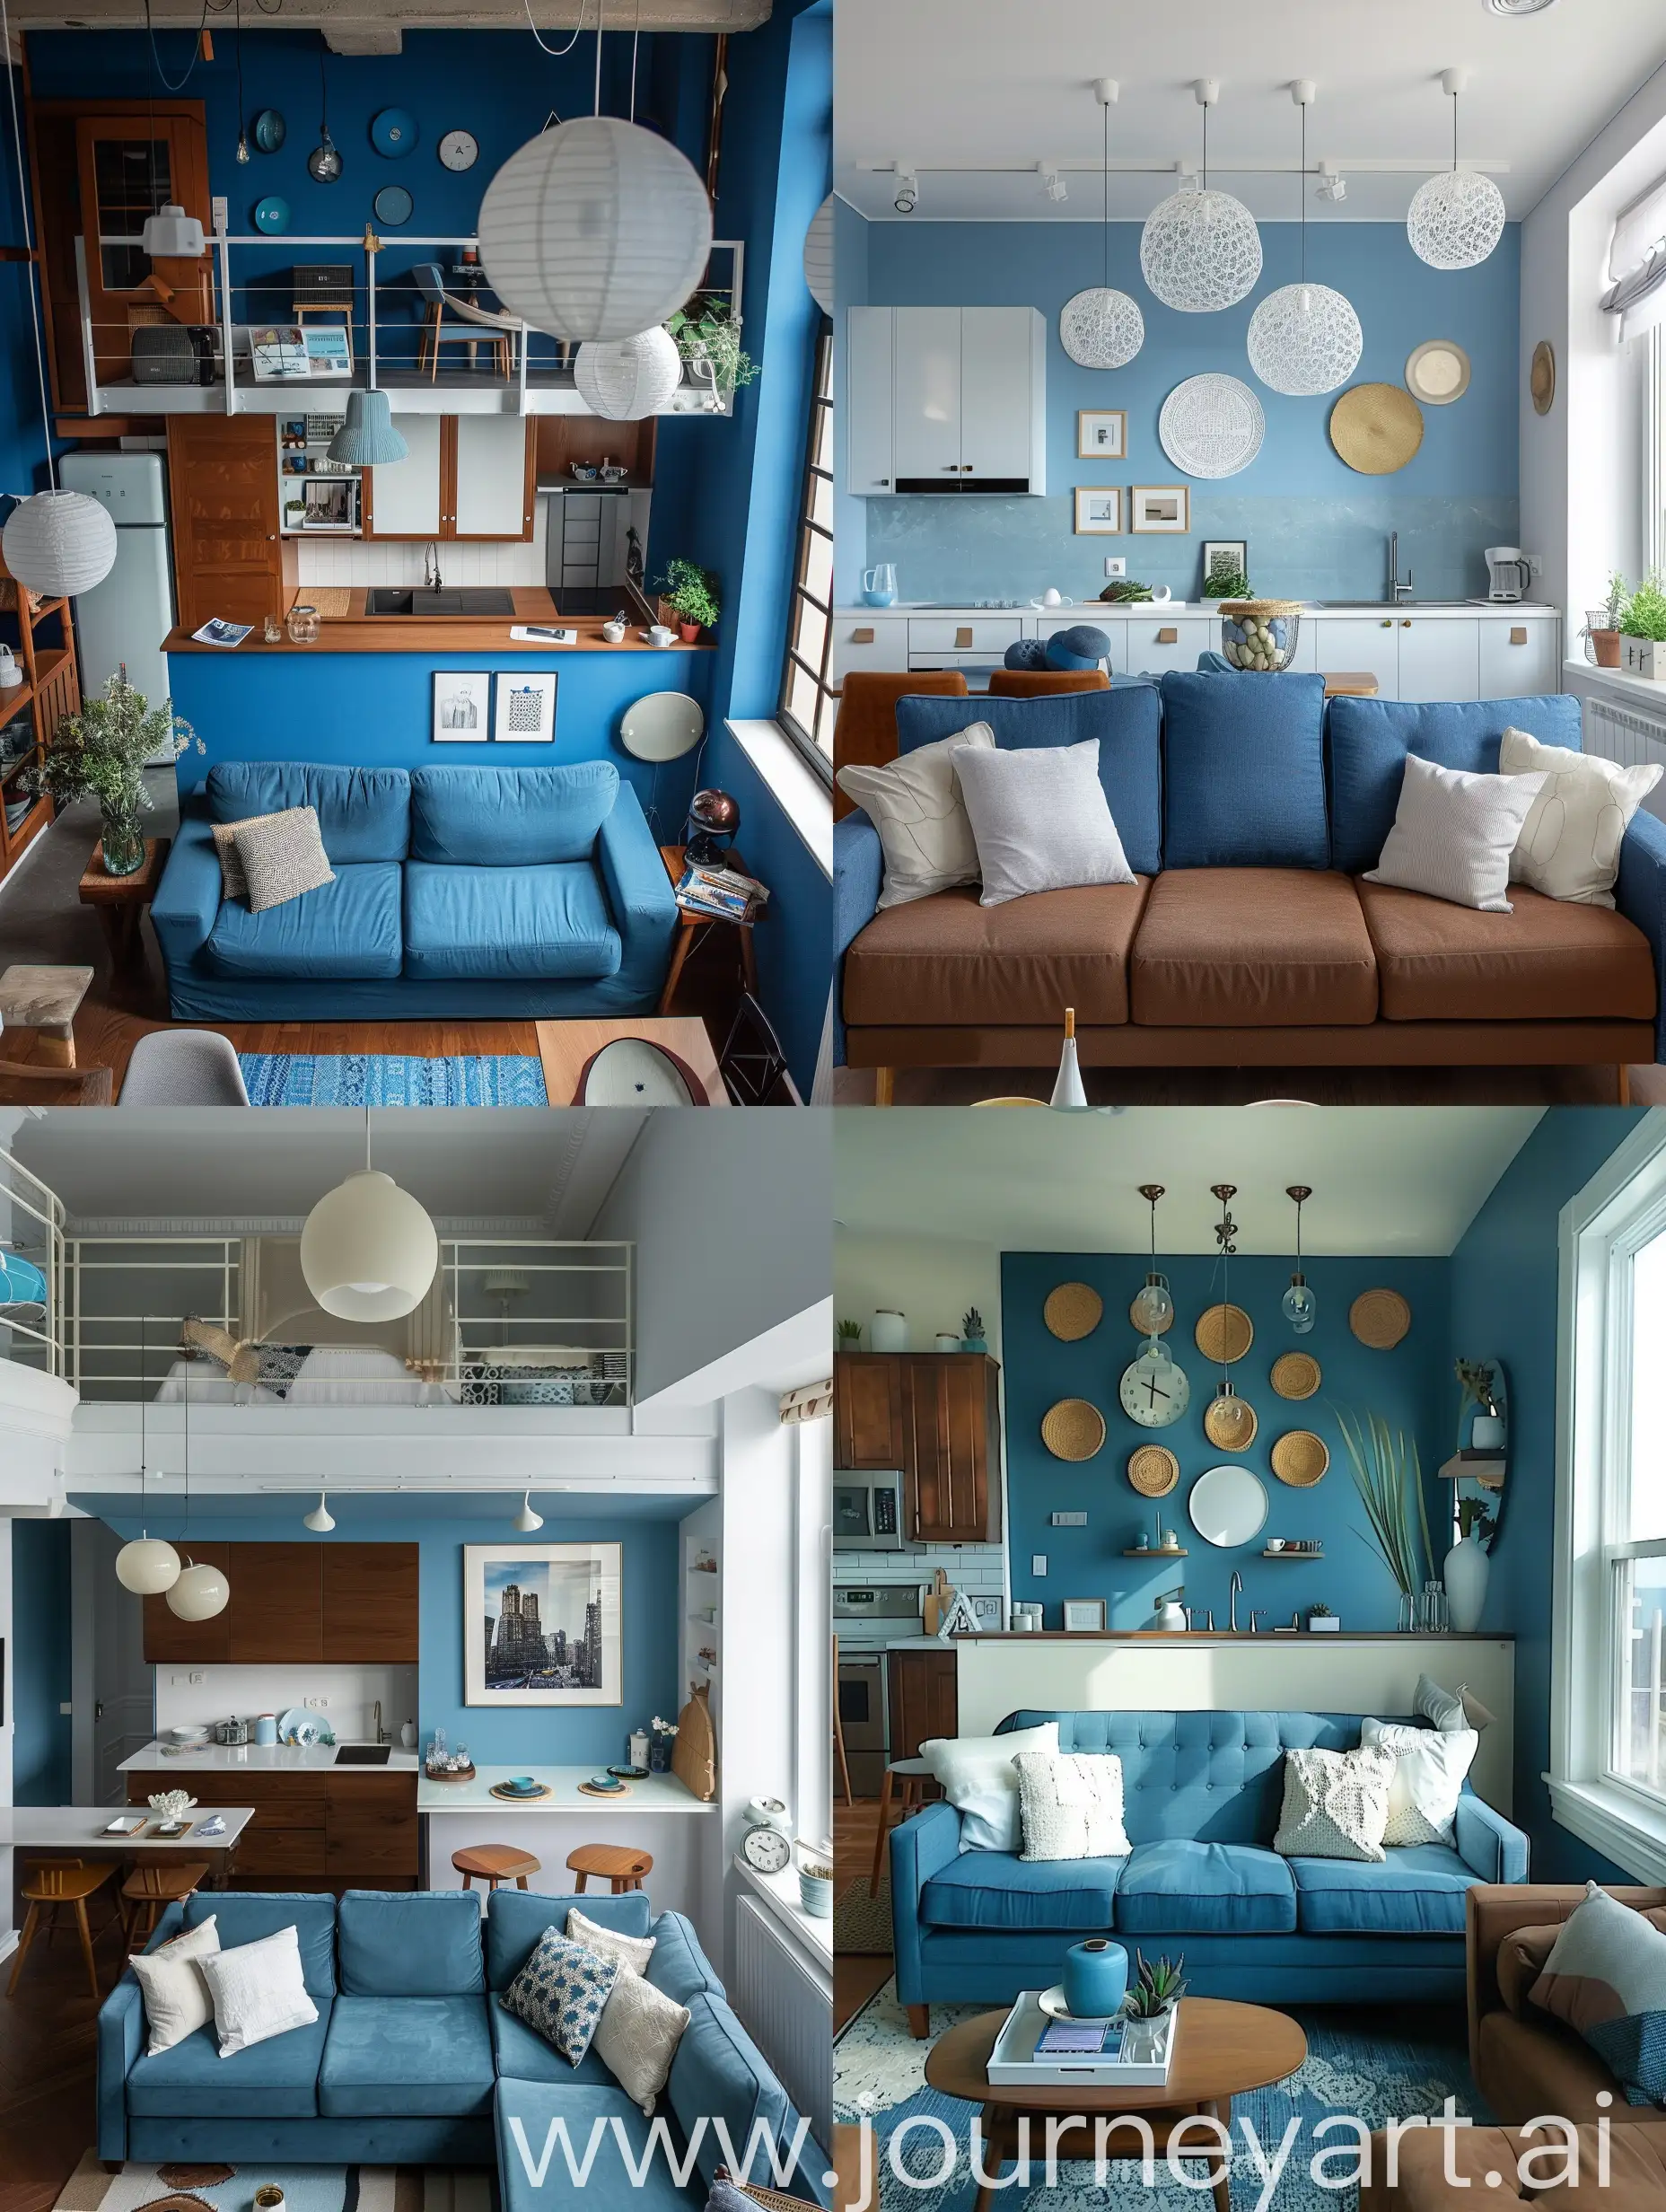 Elegant-Blue-Living-Room-with-Brown-Accents-and-Kitchenette